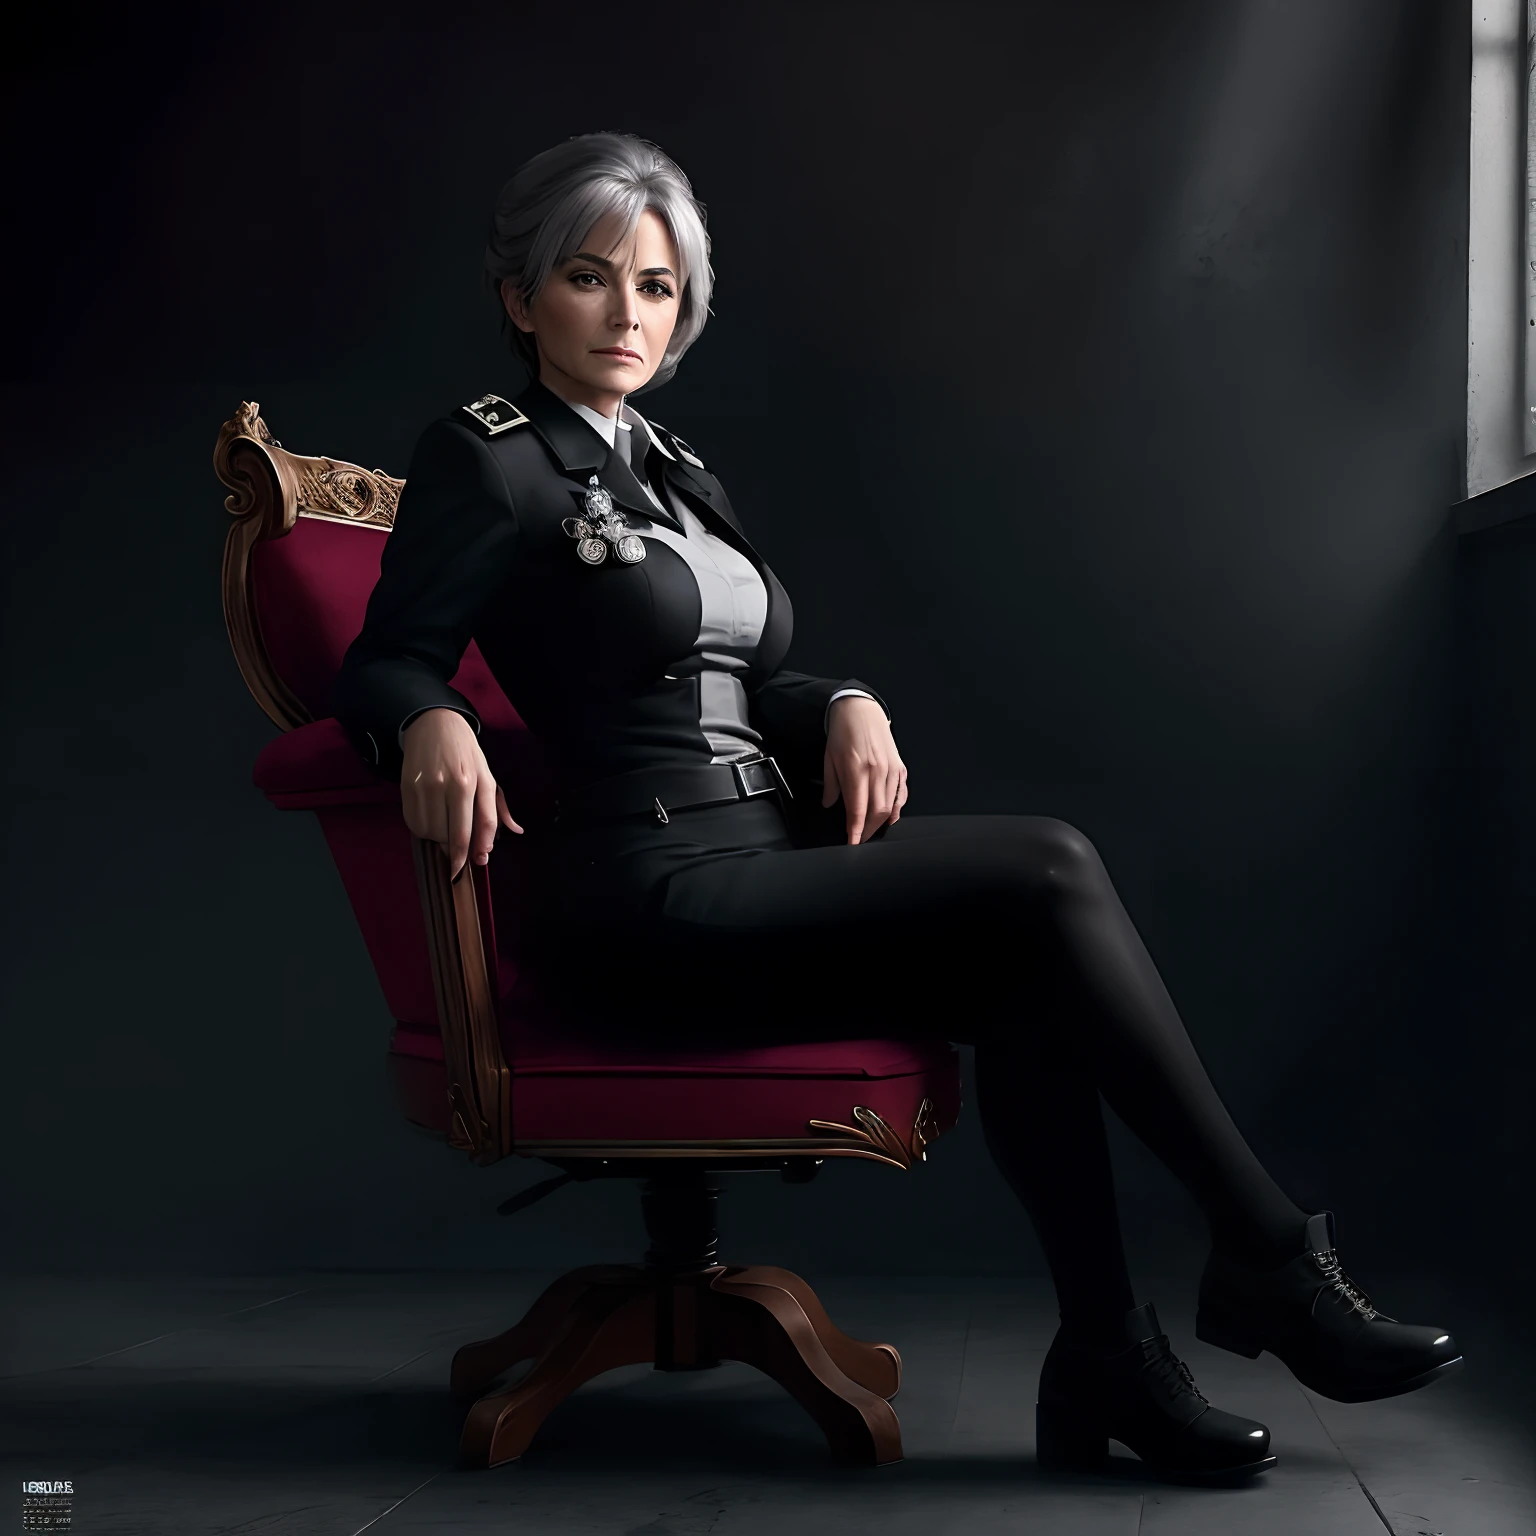 A 60 year old woman in a black imperial uniform. grey hair, Stern look. Assise sur un trone somptueux